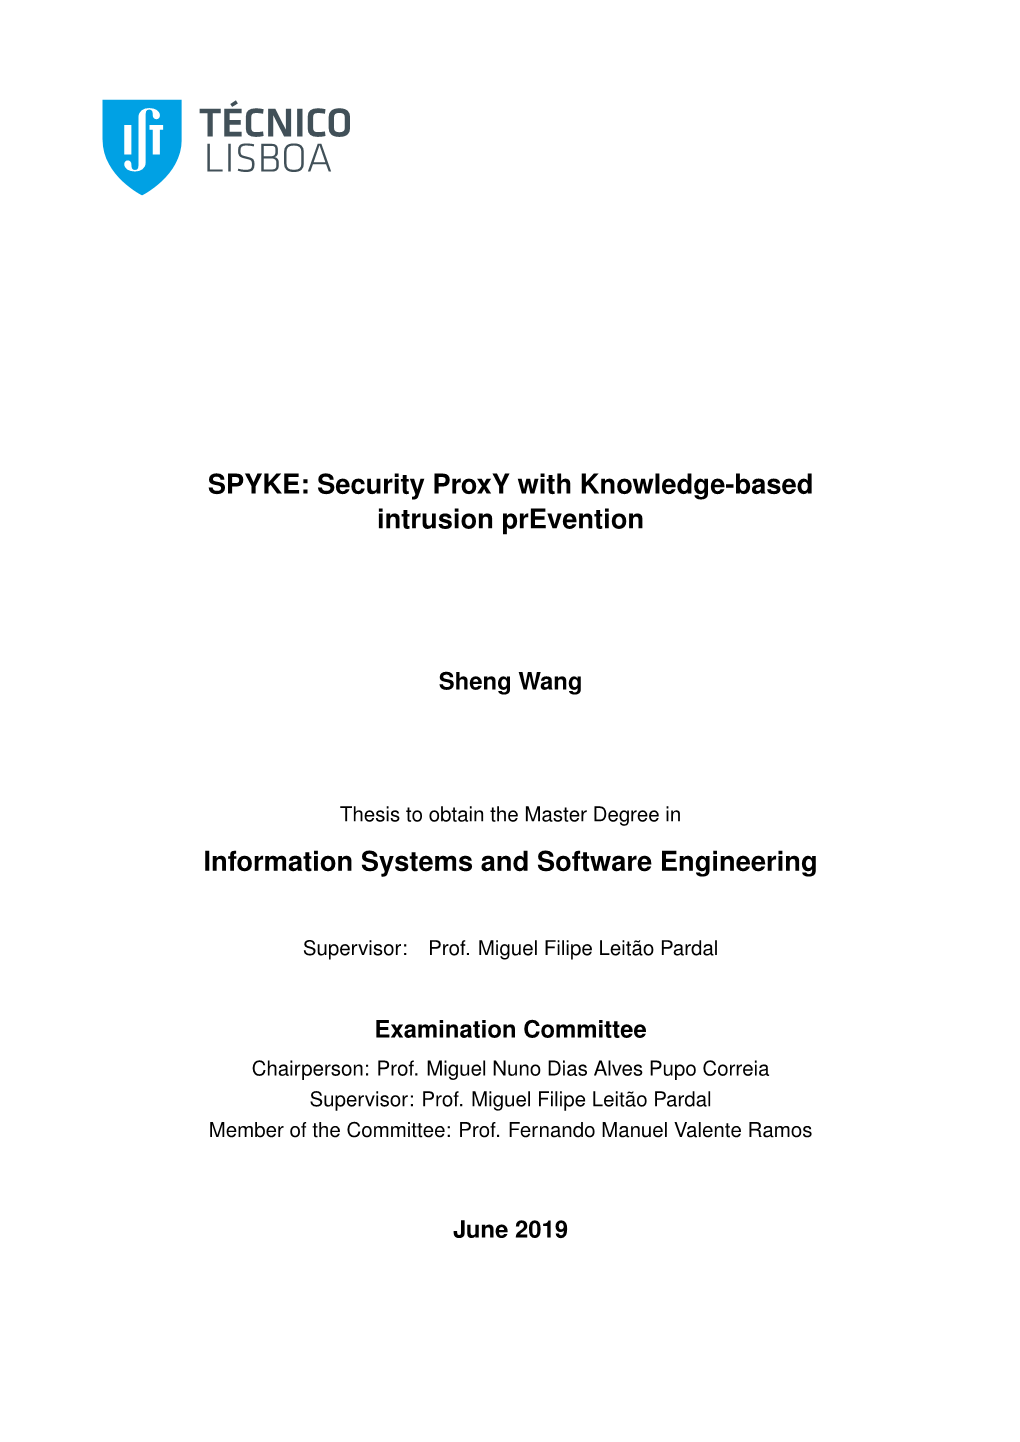 SPYKE: Security Proxy with Knowledge-Based Intrusion Prevention